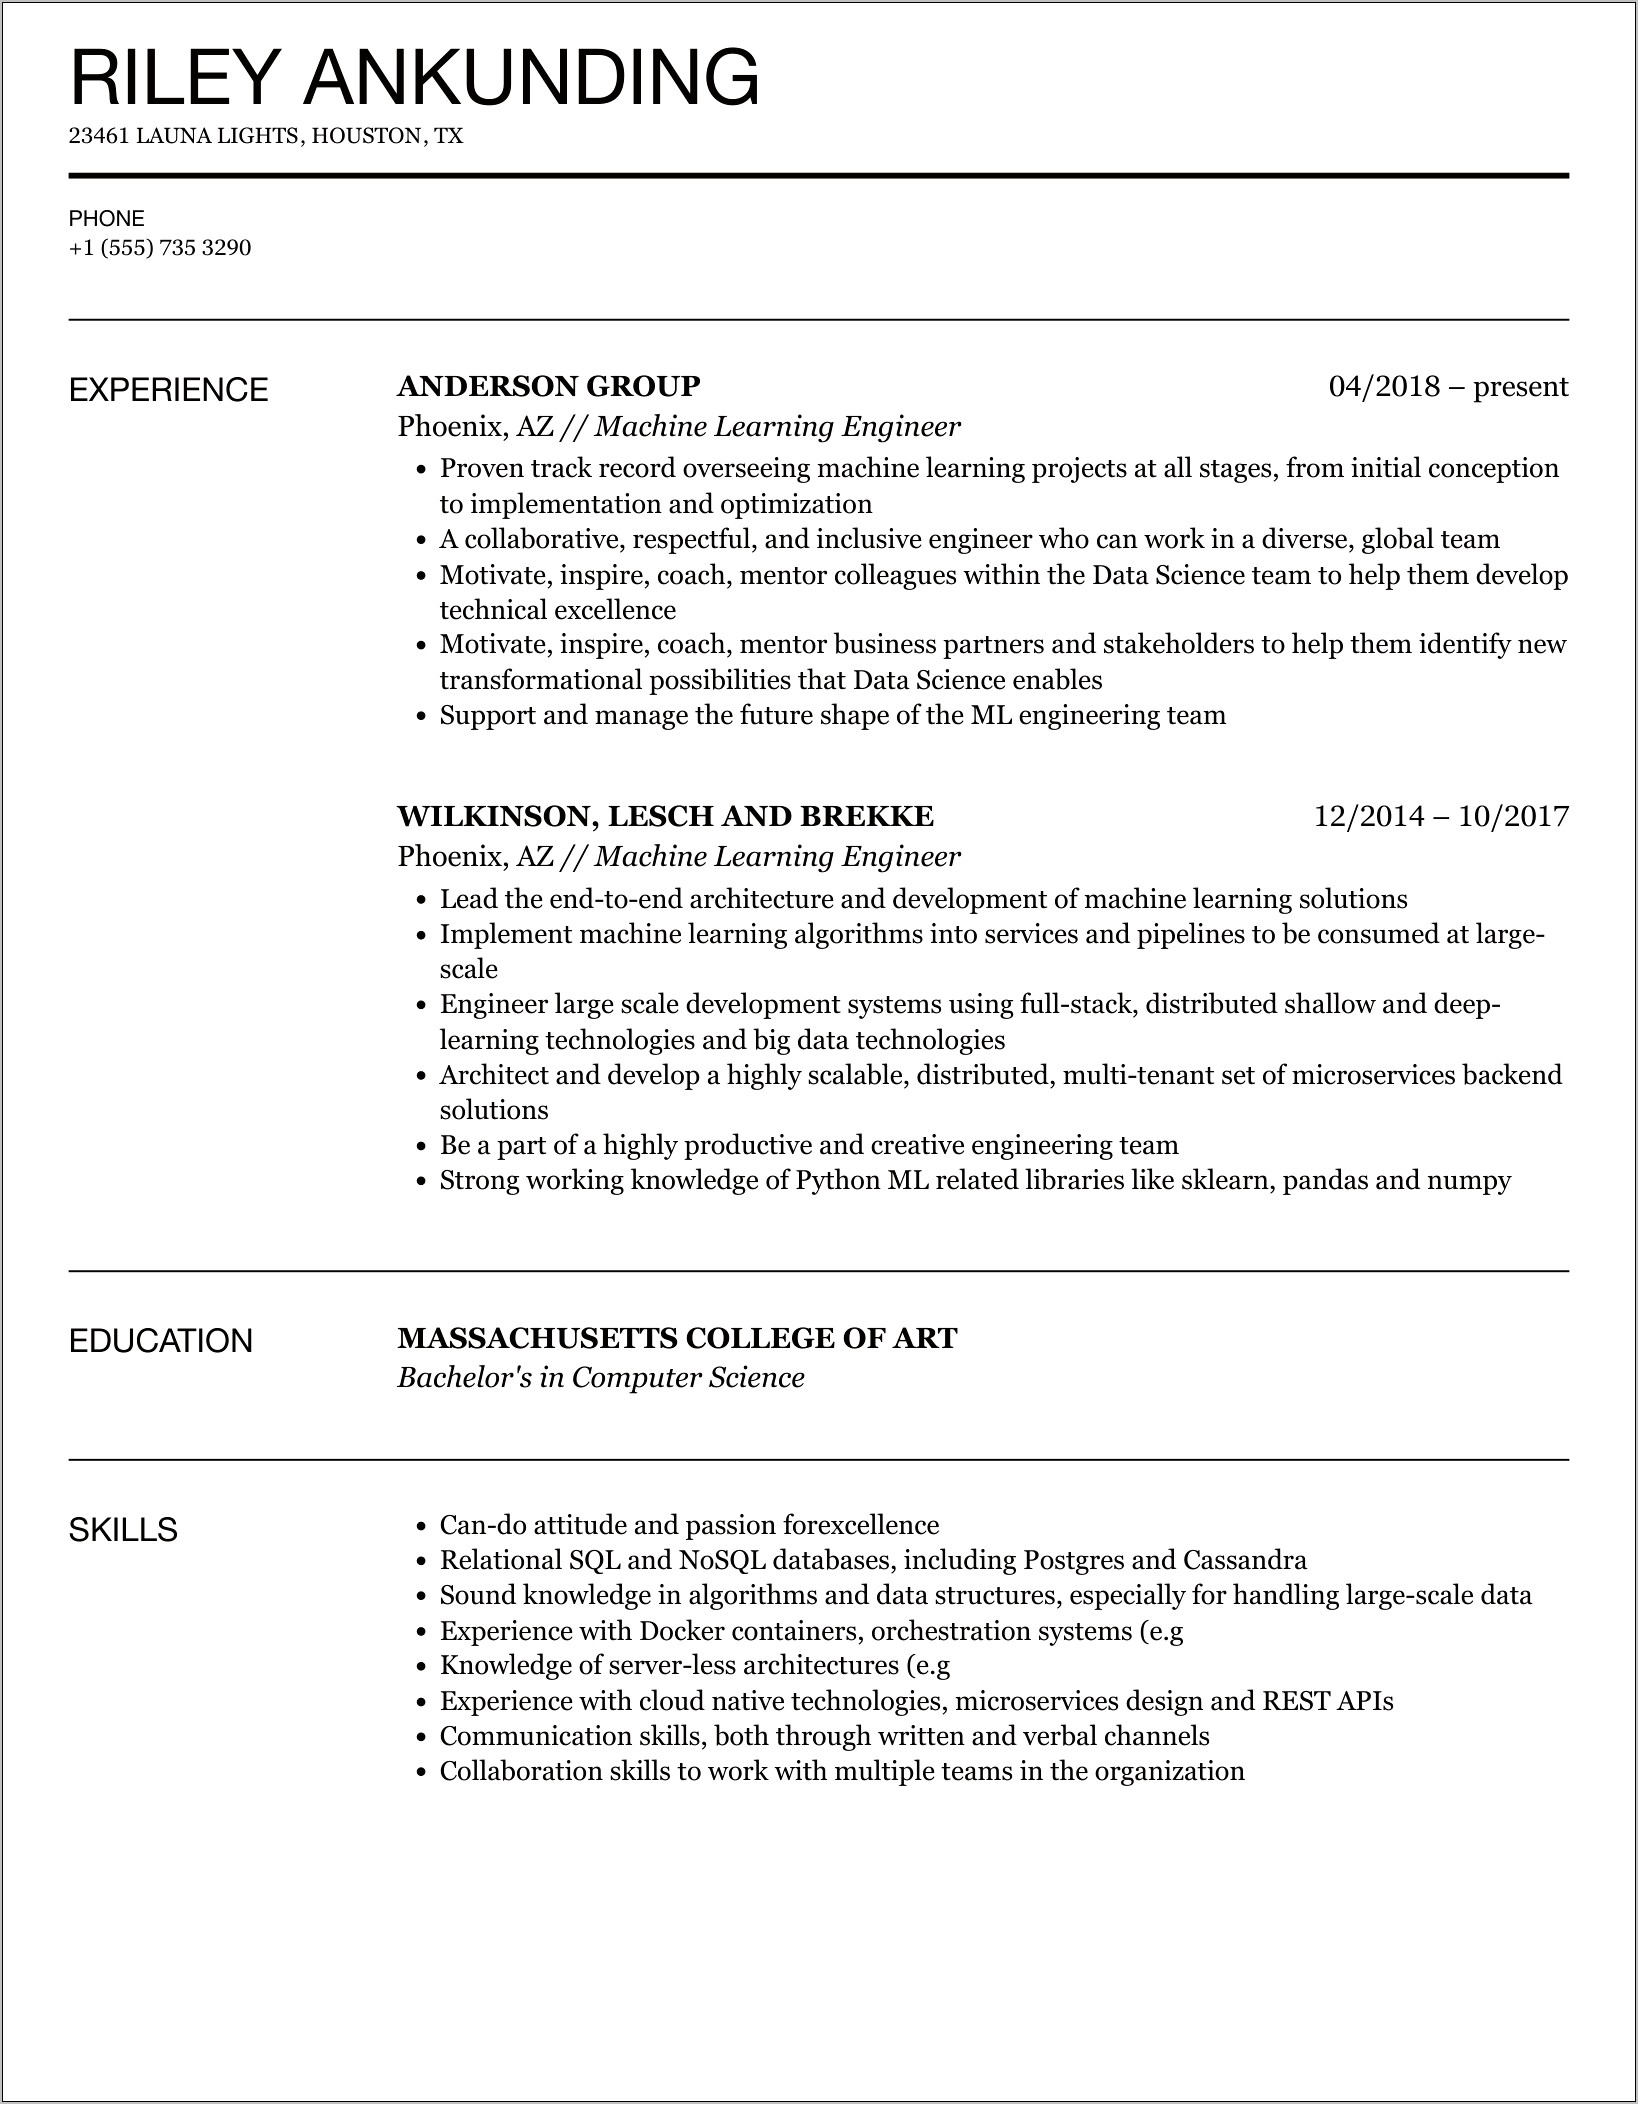 Sample Resumes On Artificial Intelligence